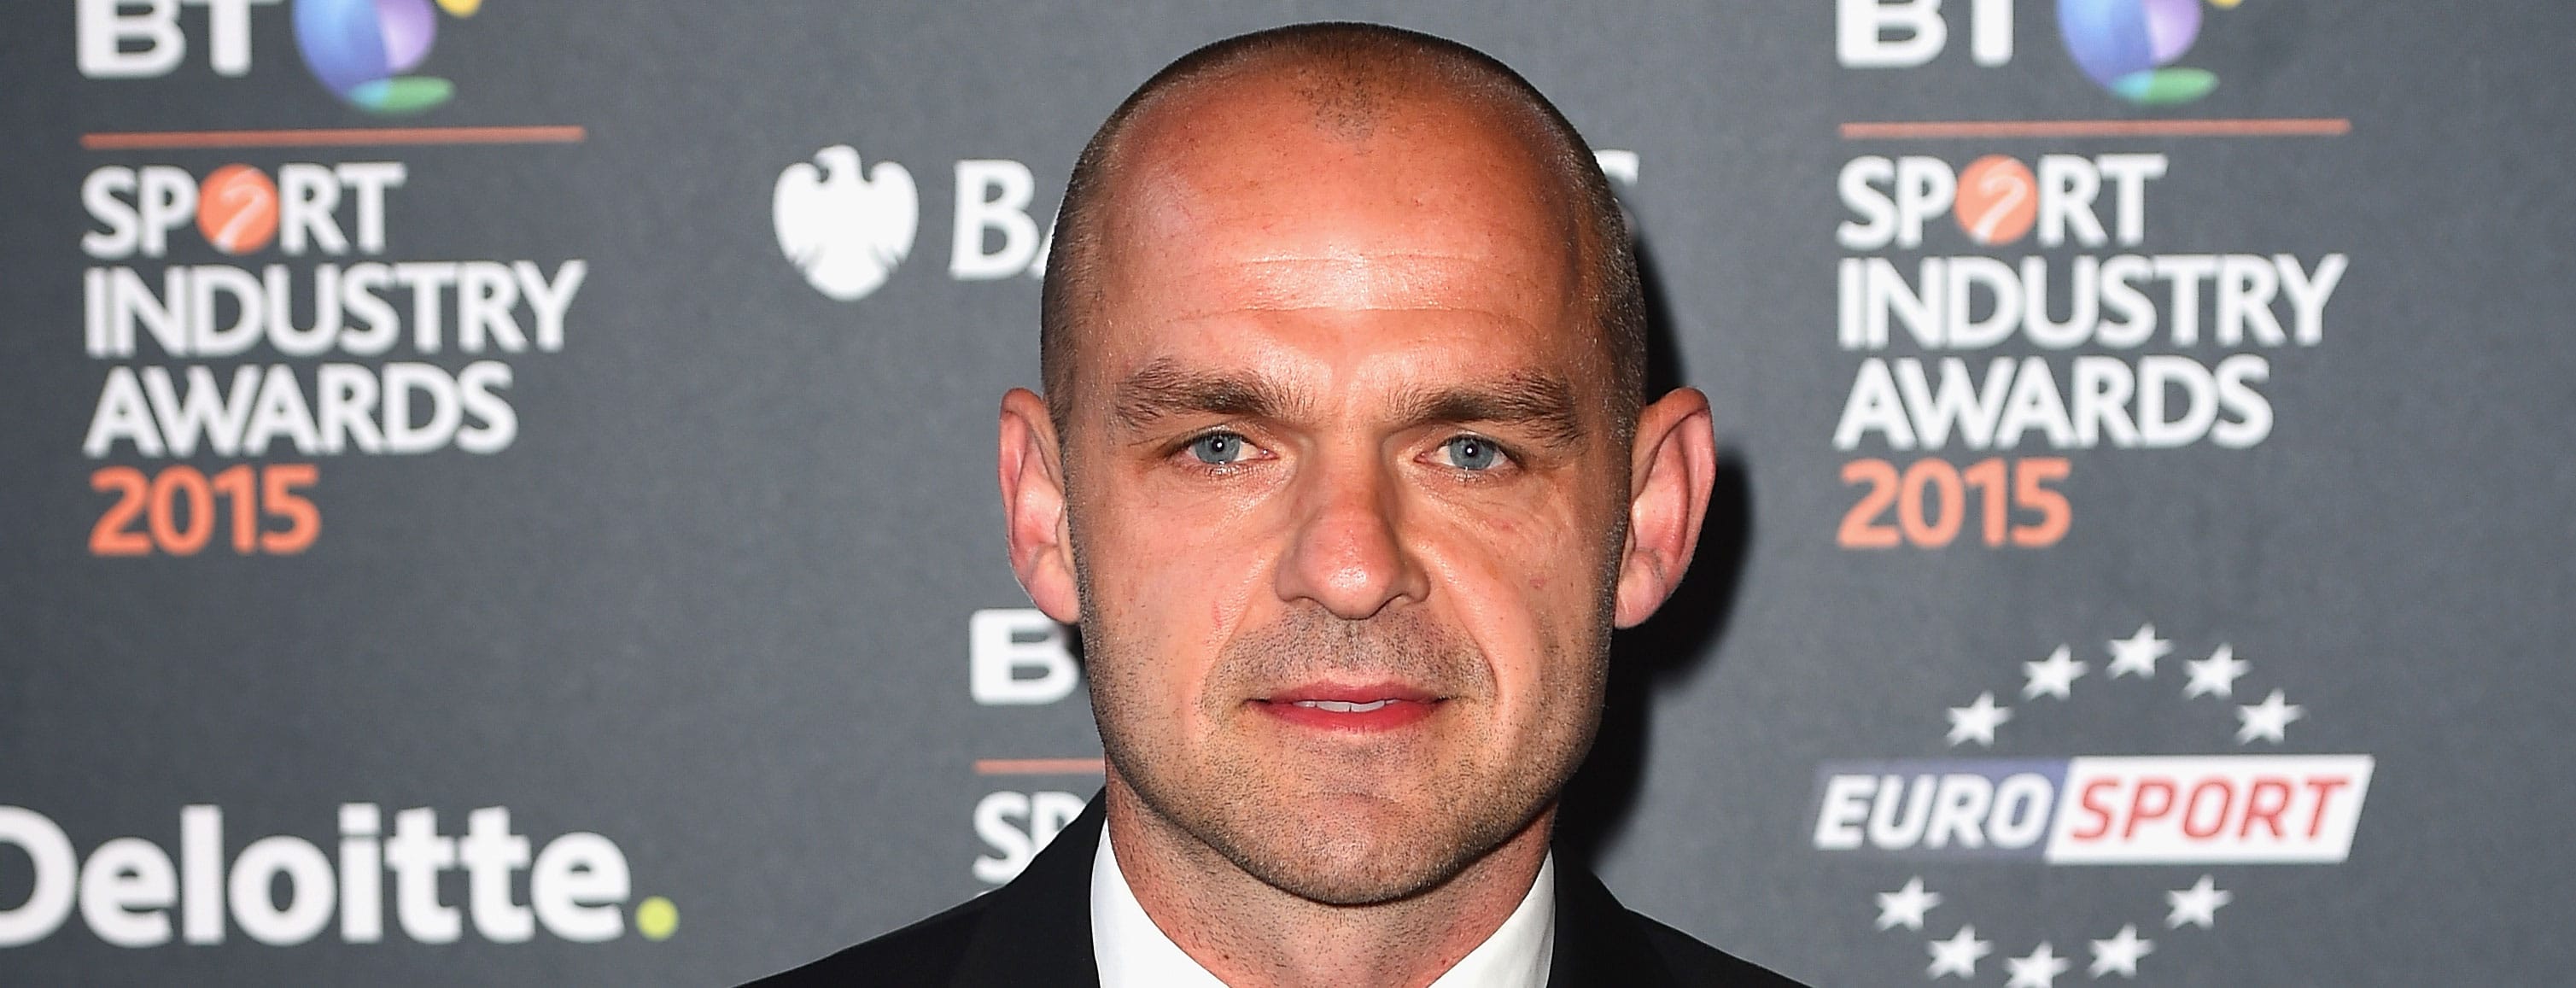 bwin exclusive: Danny Murphy previews the new season